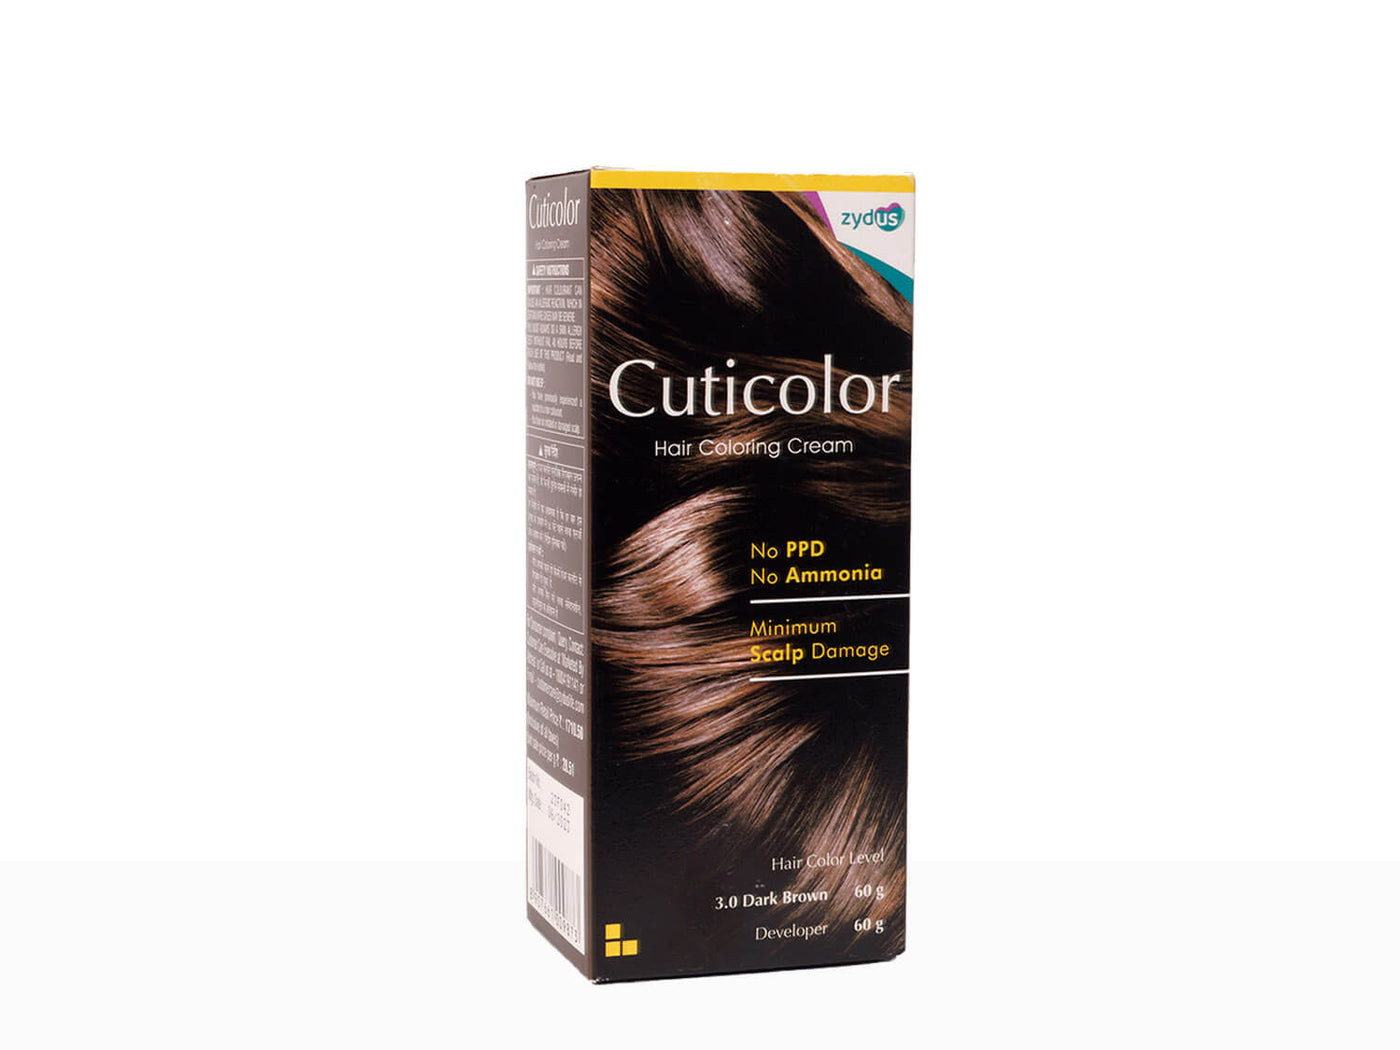 CUTICOLOR BLACK HAIR COLORING Cream 60gm - Buy Medicines online at Best  Price from Netmeds.com